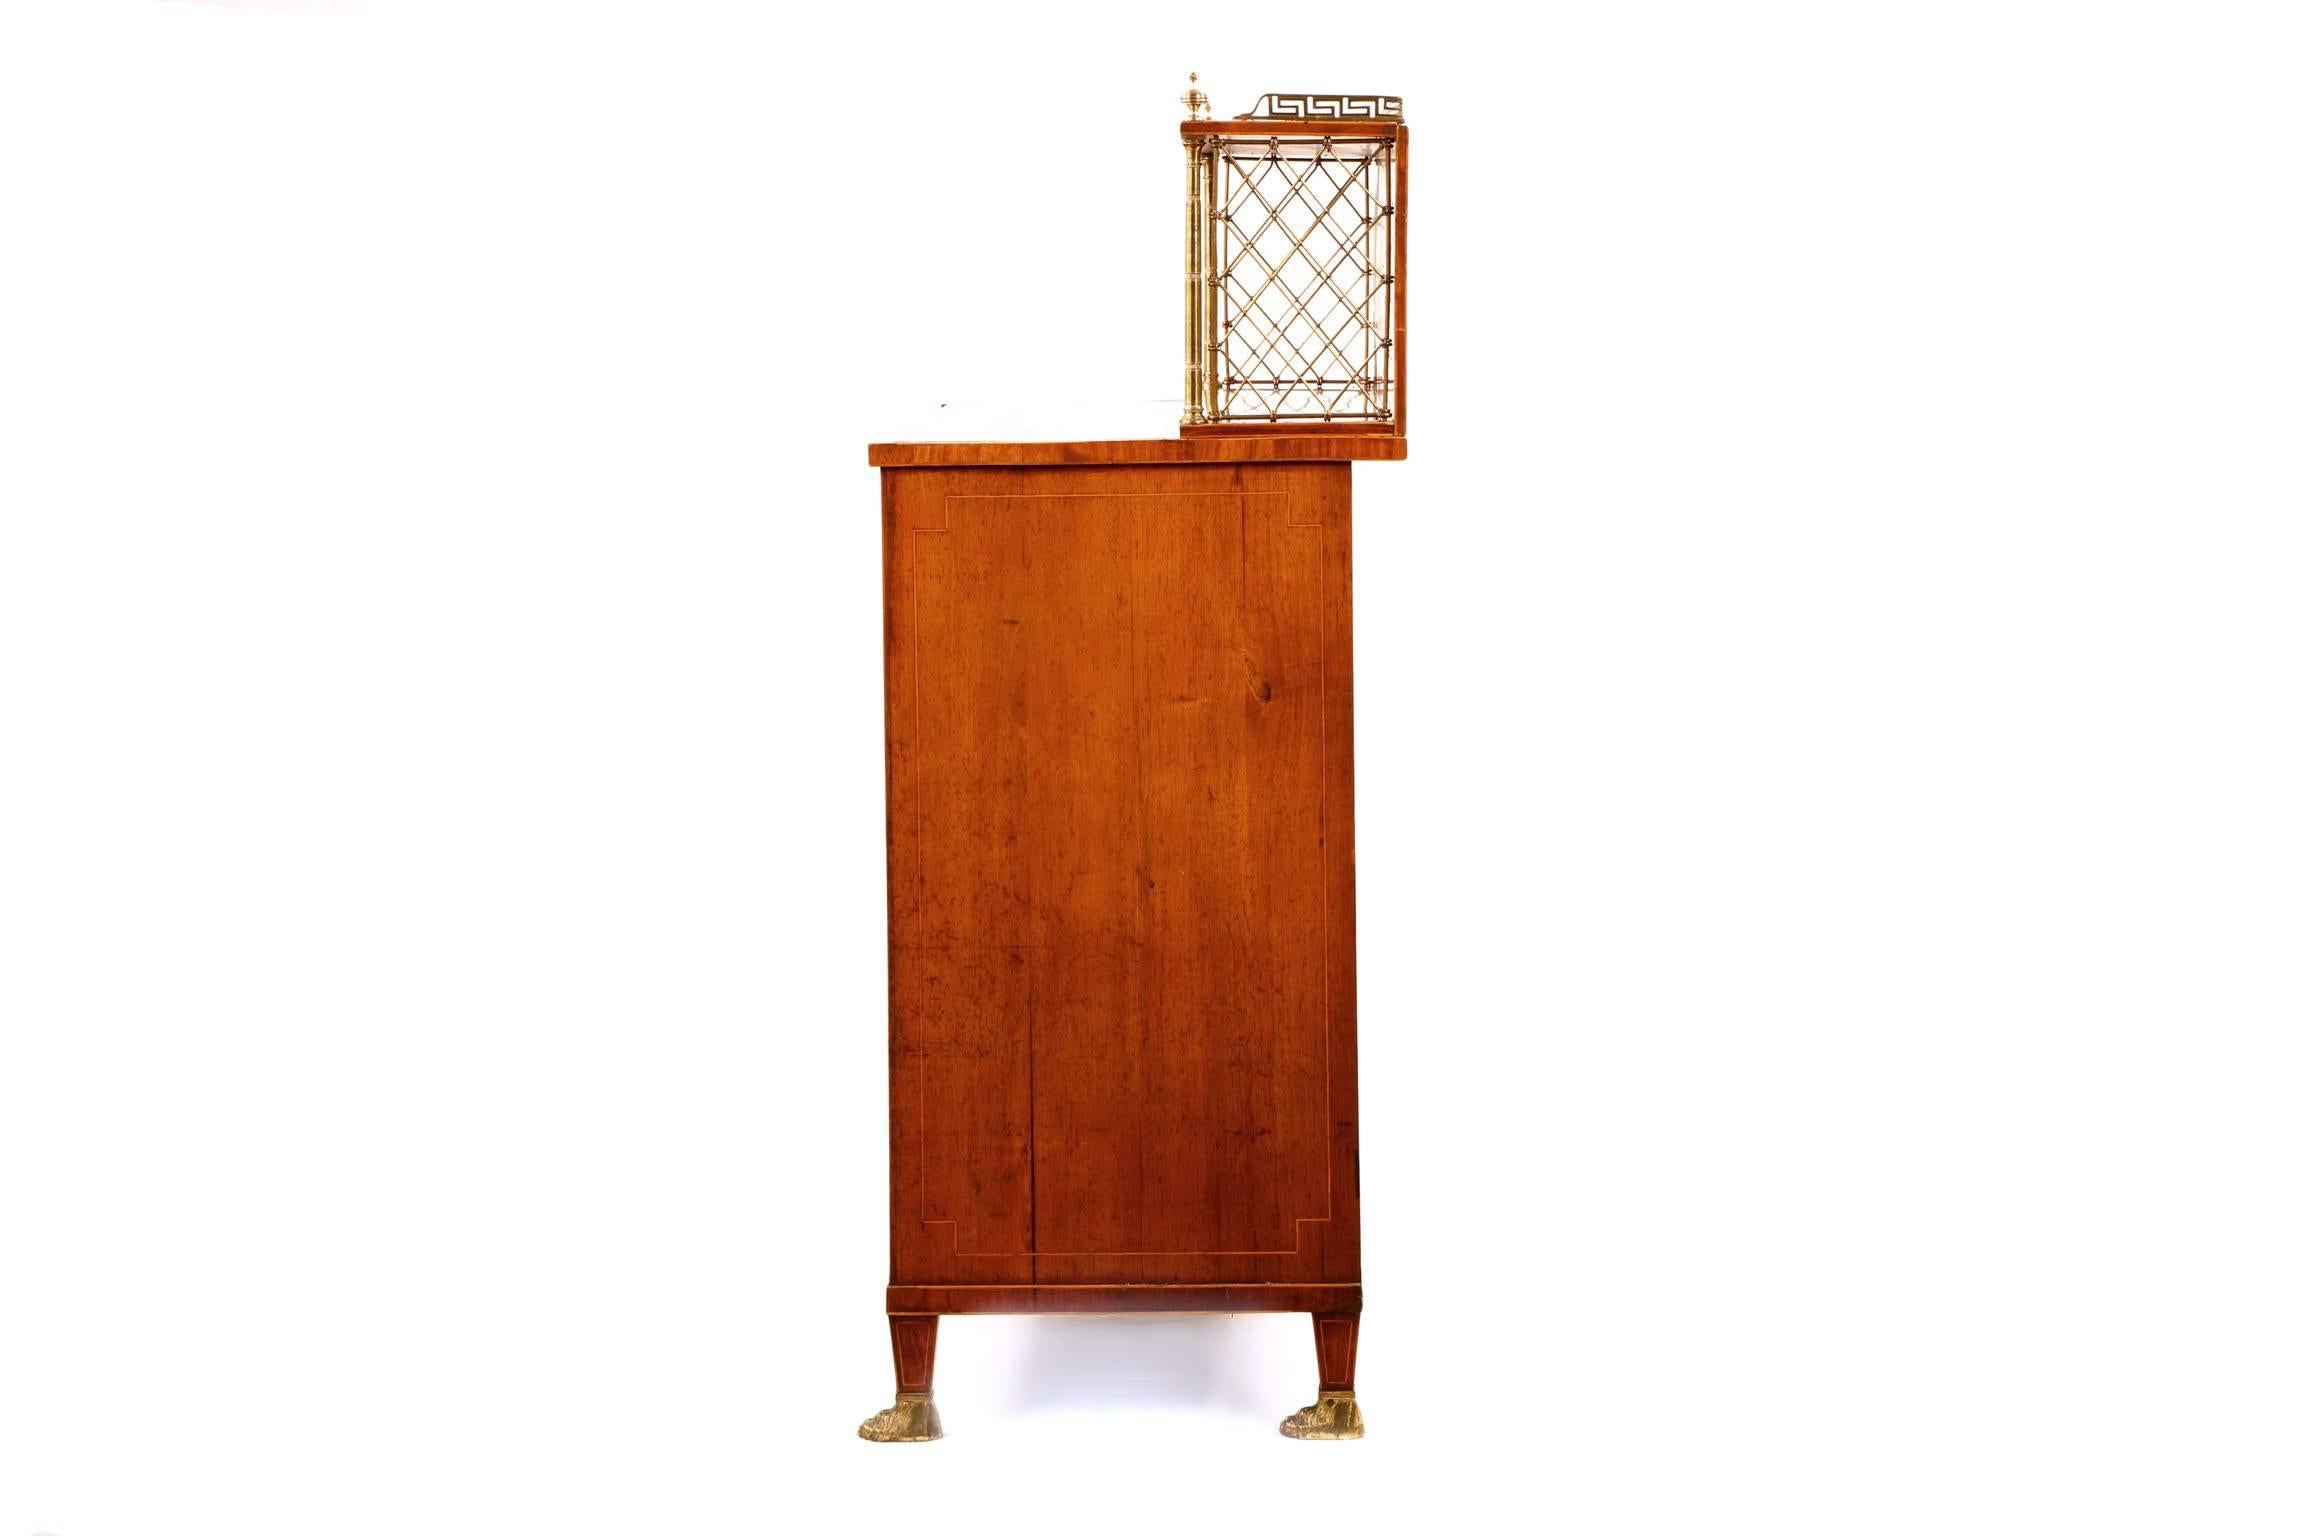 Early 19th Century Regency Brass Inlaid Rosewood Chiffonier Cabinet in Manner of John Mclean